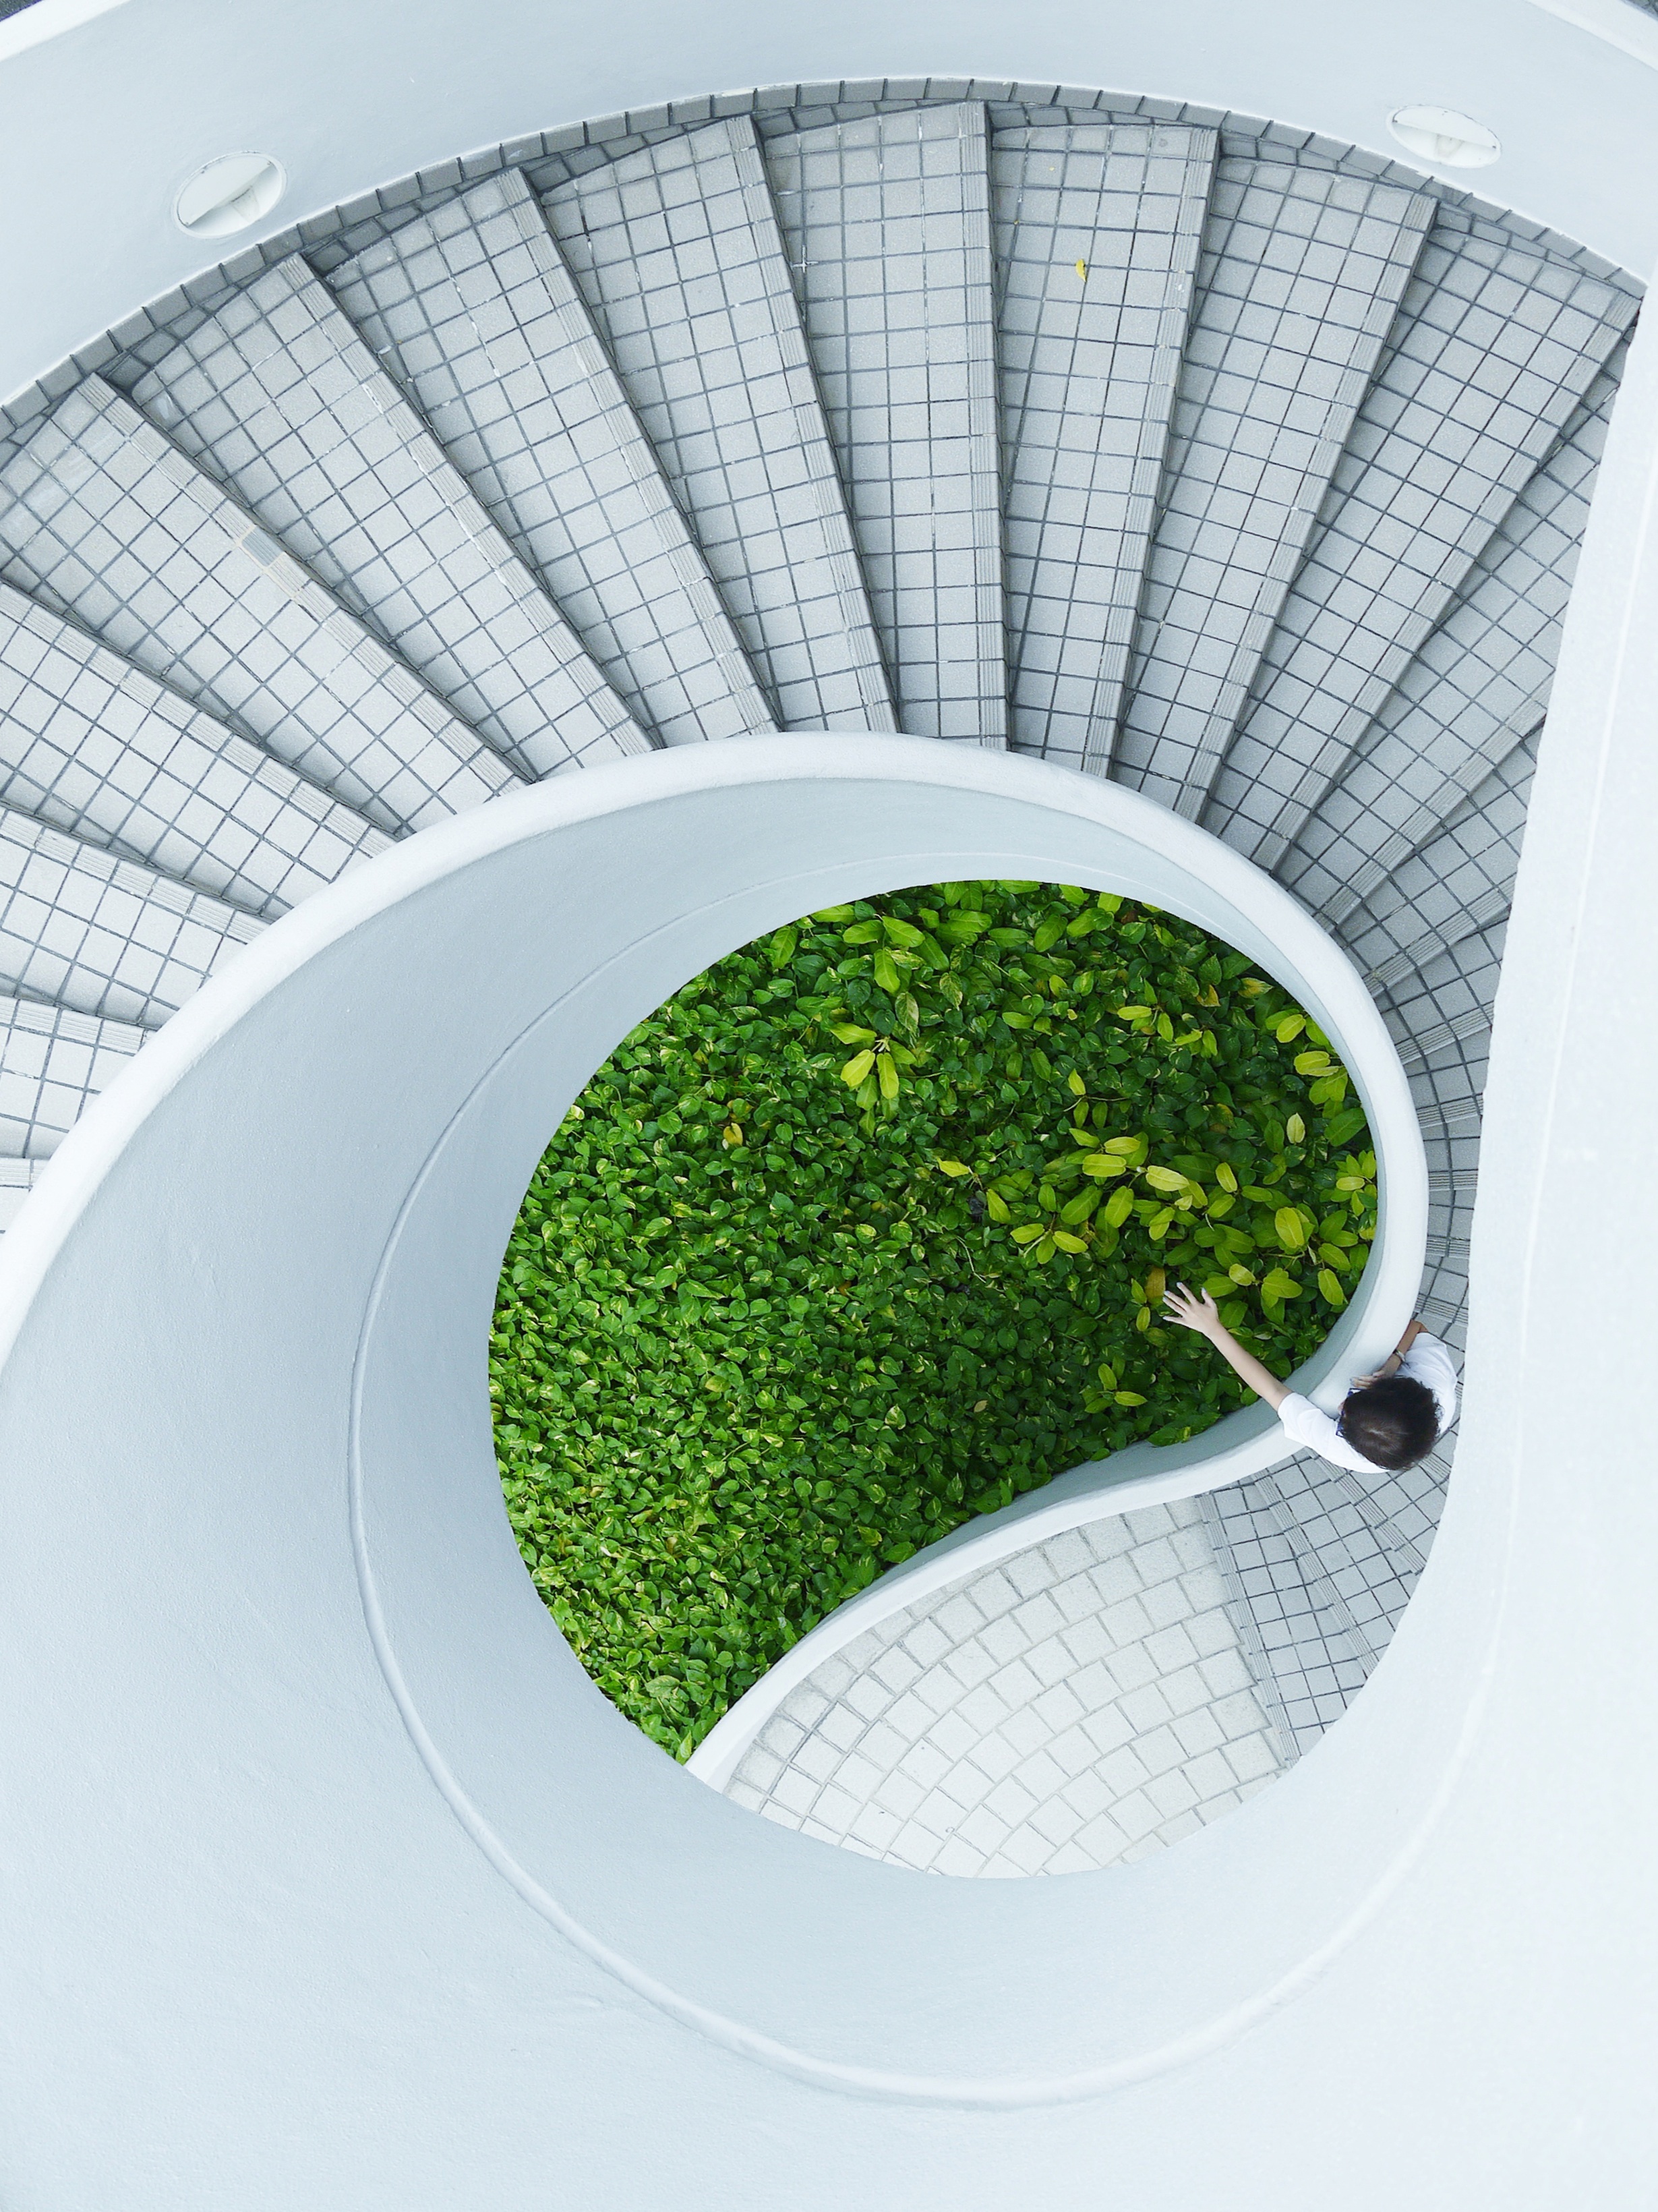 A person touches green plants at the center of a white spiral staircase